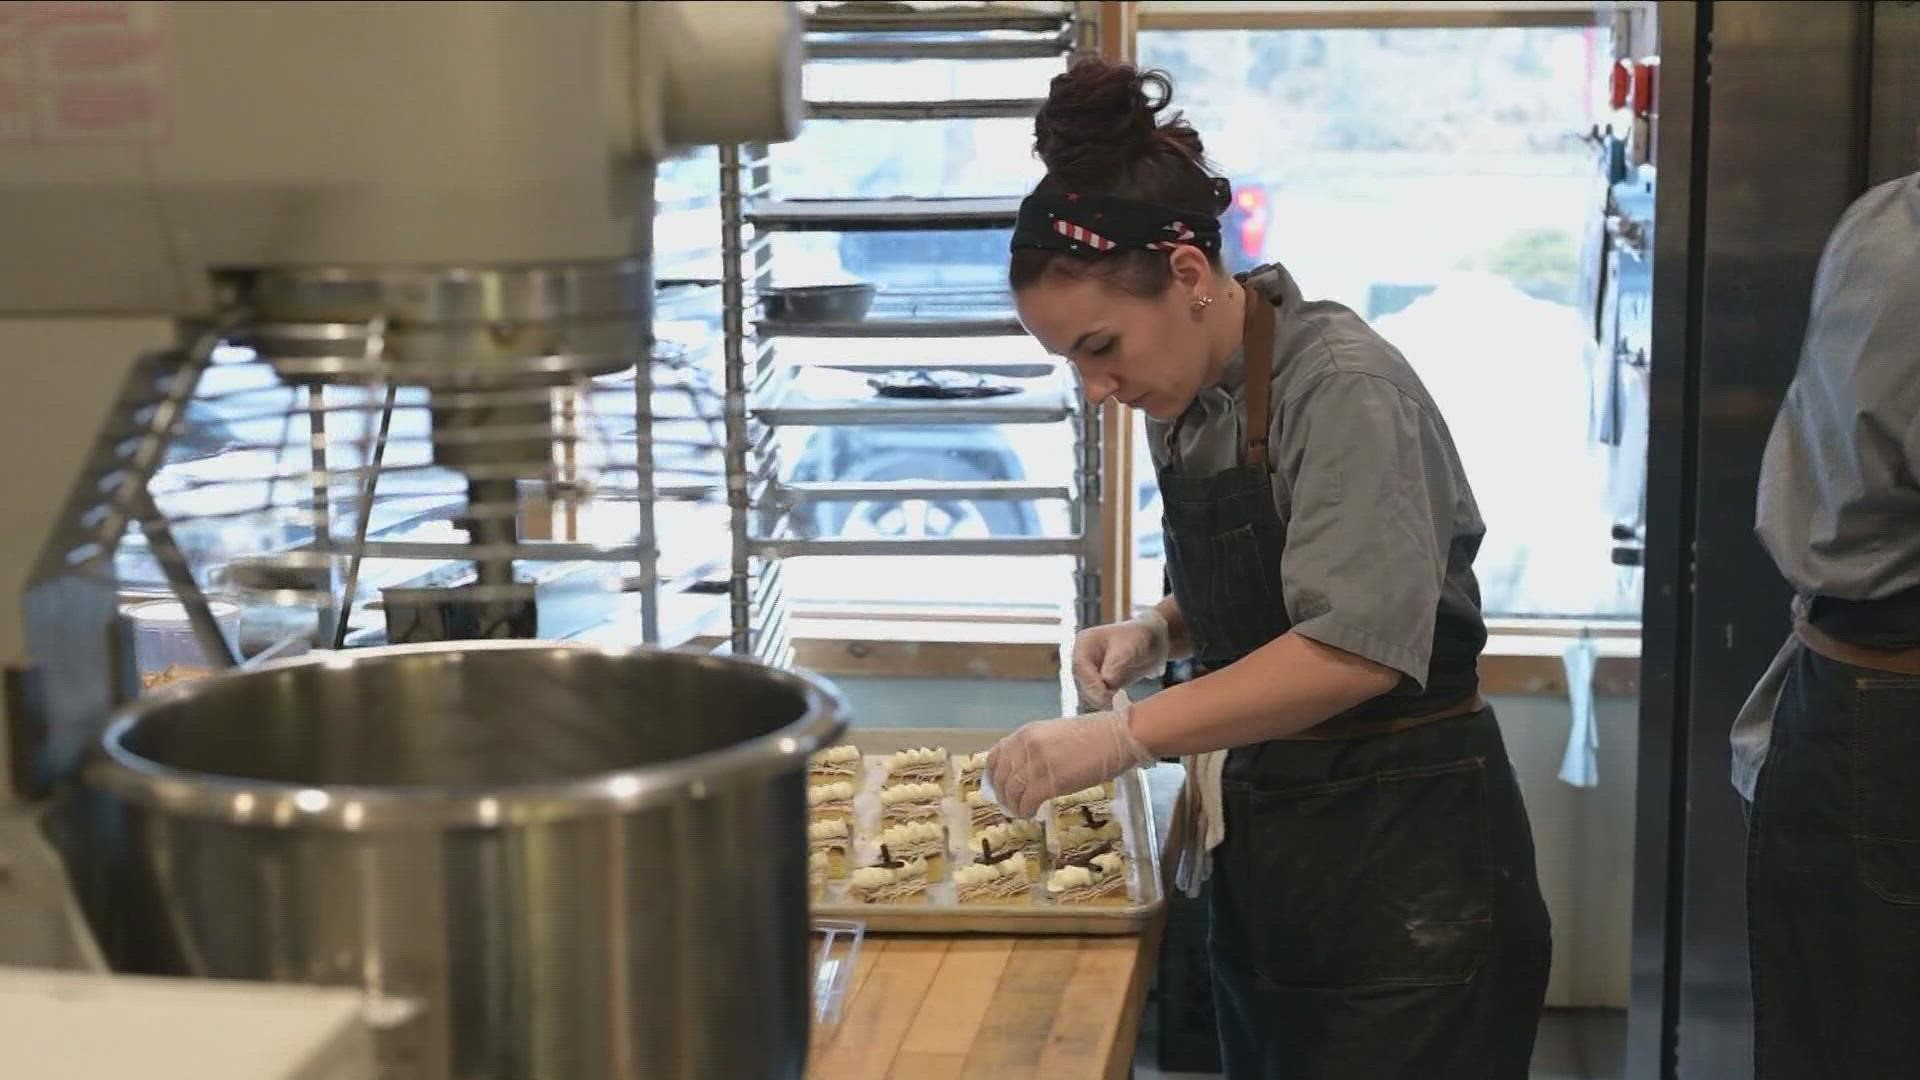 The Elm Street Bakery has more going on than just a bakery.